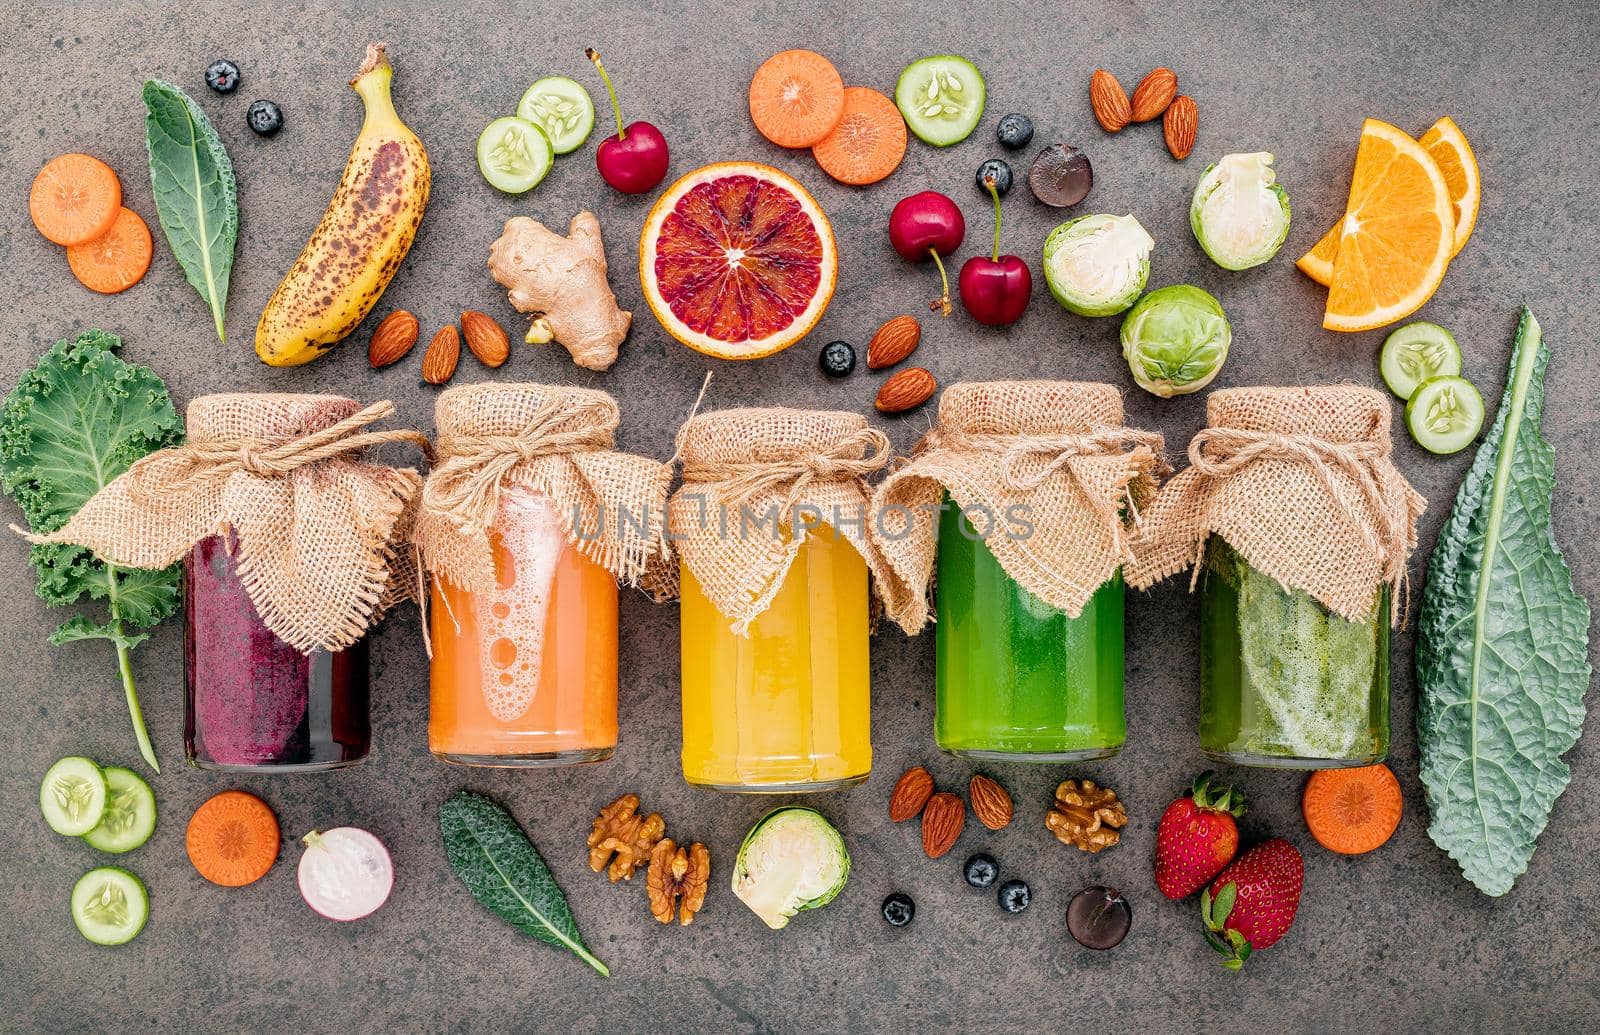 Colourful healthy smoothies and juices in bottles with fresh tropical fruit and superfoods on dark stone background with copy space.